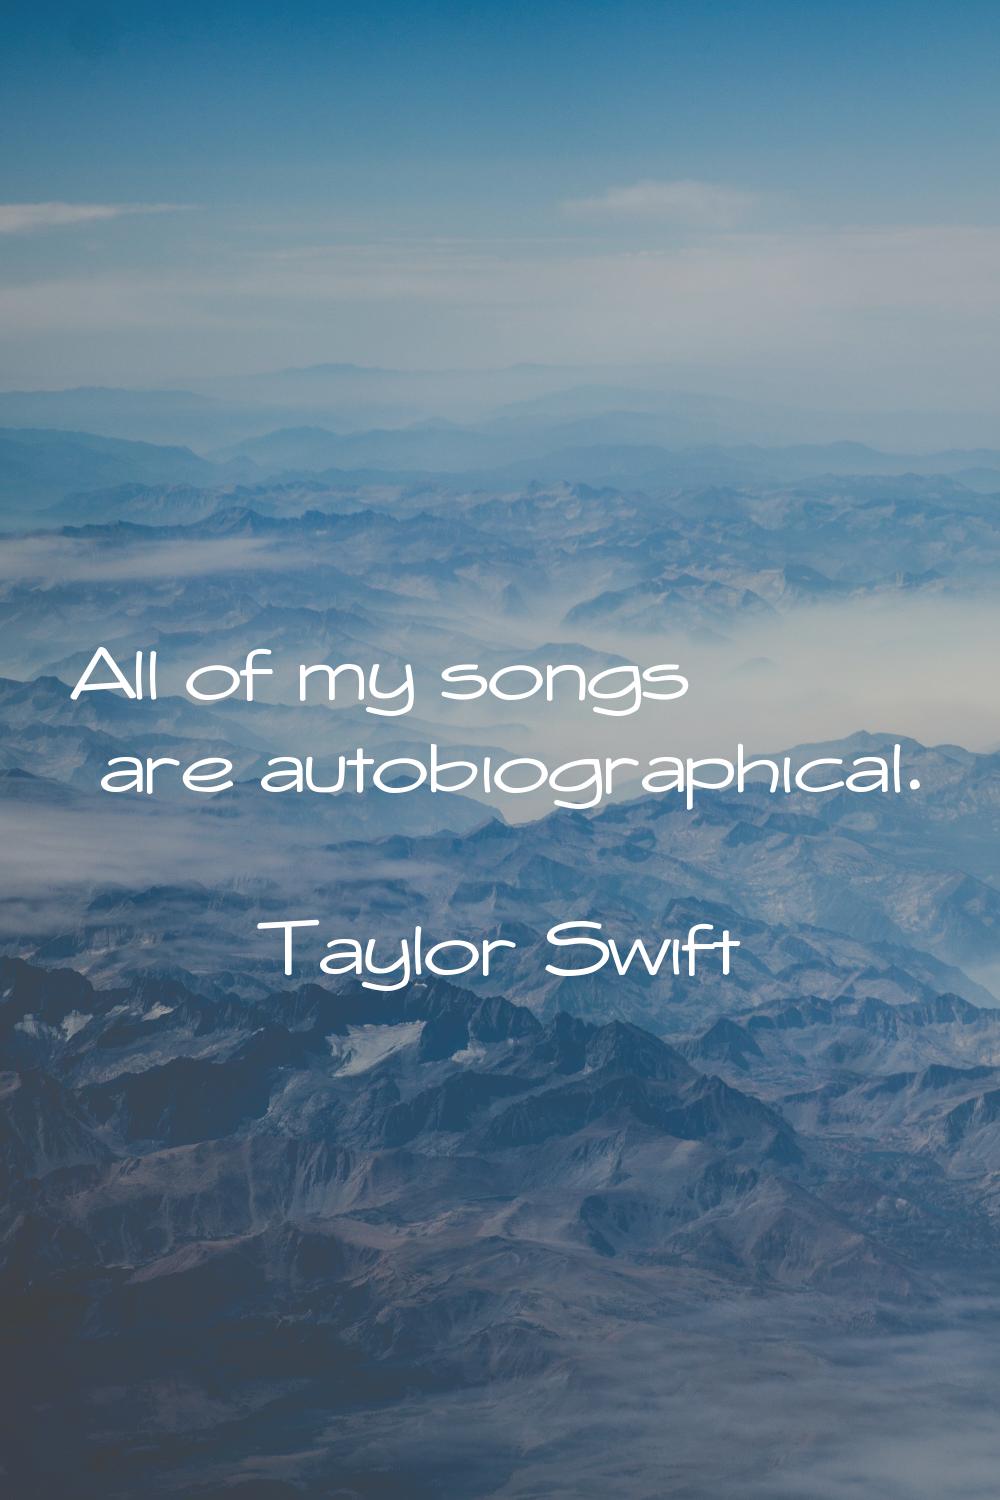 All of my songs are autobiographical.